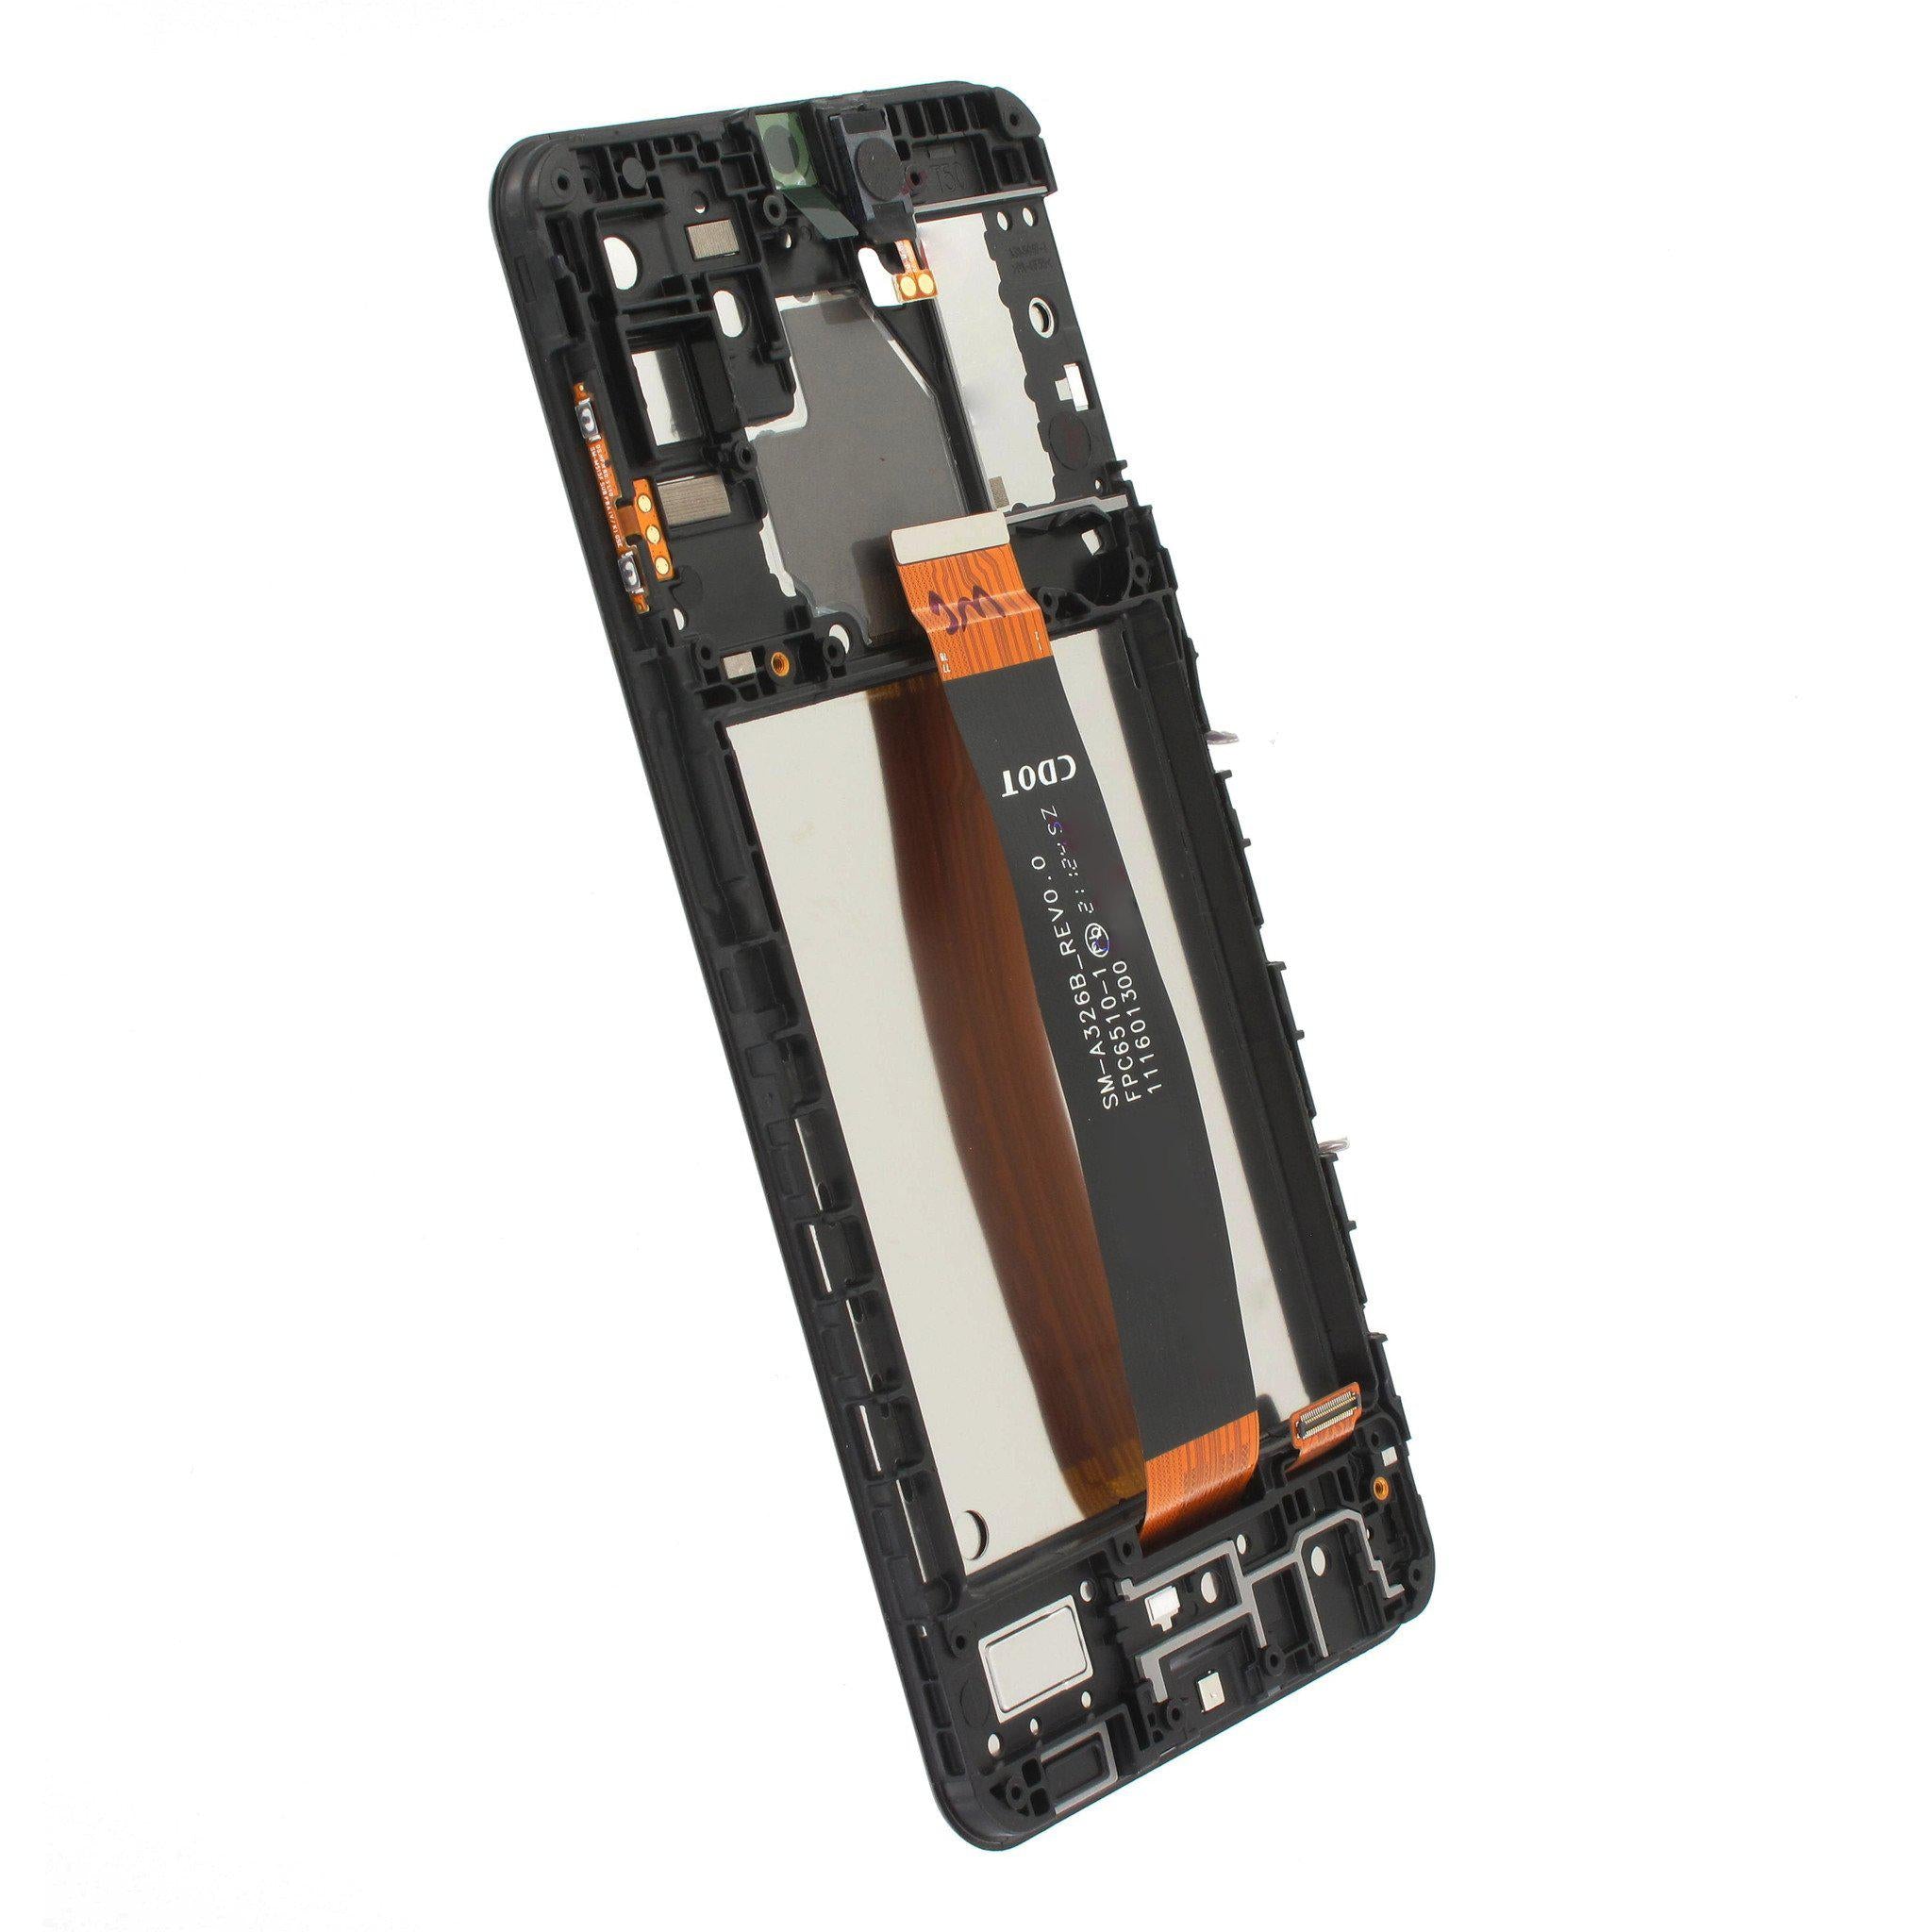 Screen Service Pack For Samsung Galaxy A32 5G A326 LCD Assembly With Frame - Black-Mobile Phone Parts-First Help Tech